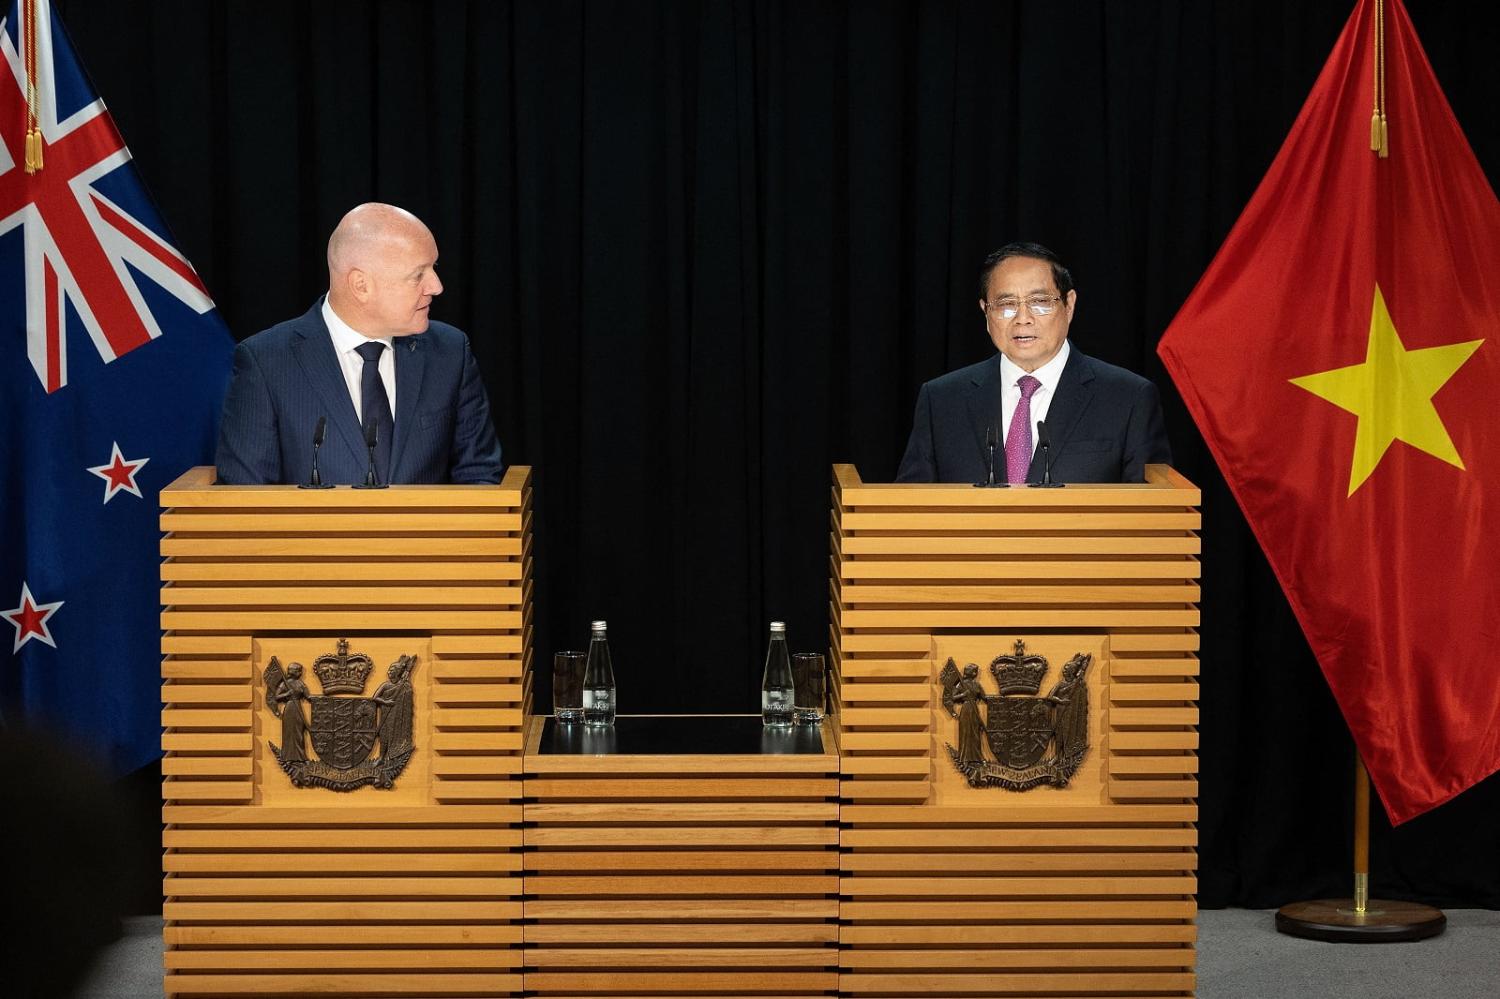 New Zealand's Prime Minister Christopher Luxon (L) and Vietnam's Prime Minister Pham Minh Chinh attend a trade signing ceremony on 11 March 2024 in Wellington (Marty Melville/AFP via Getty Images)